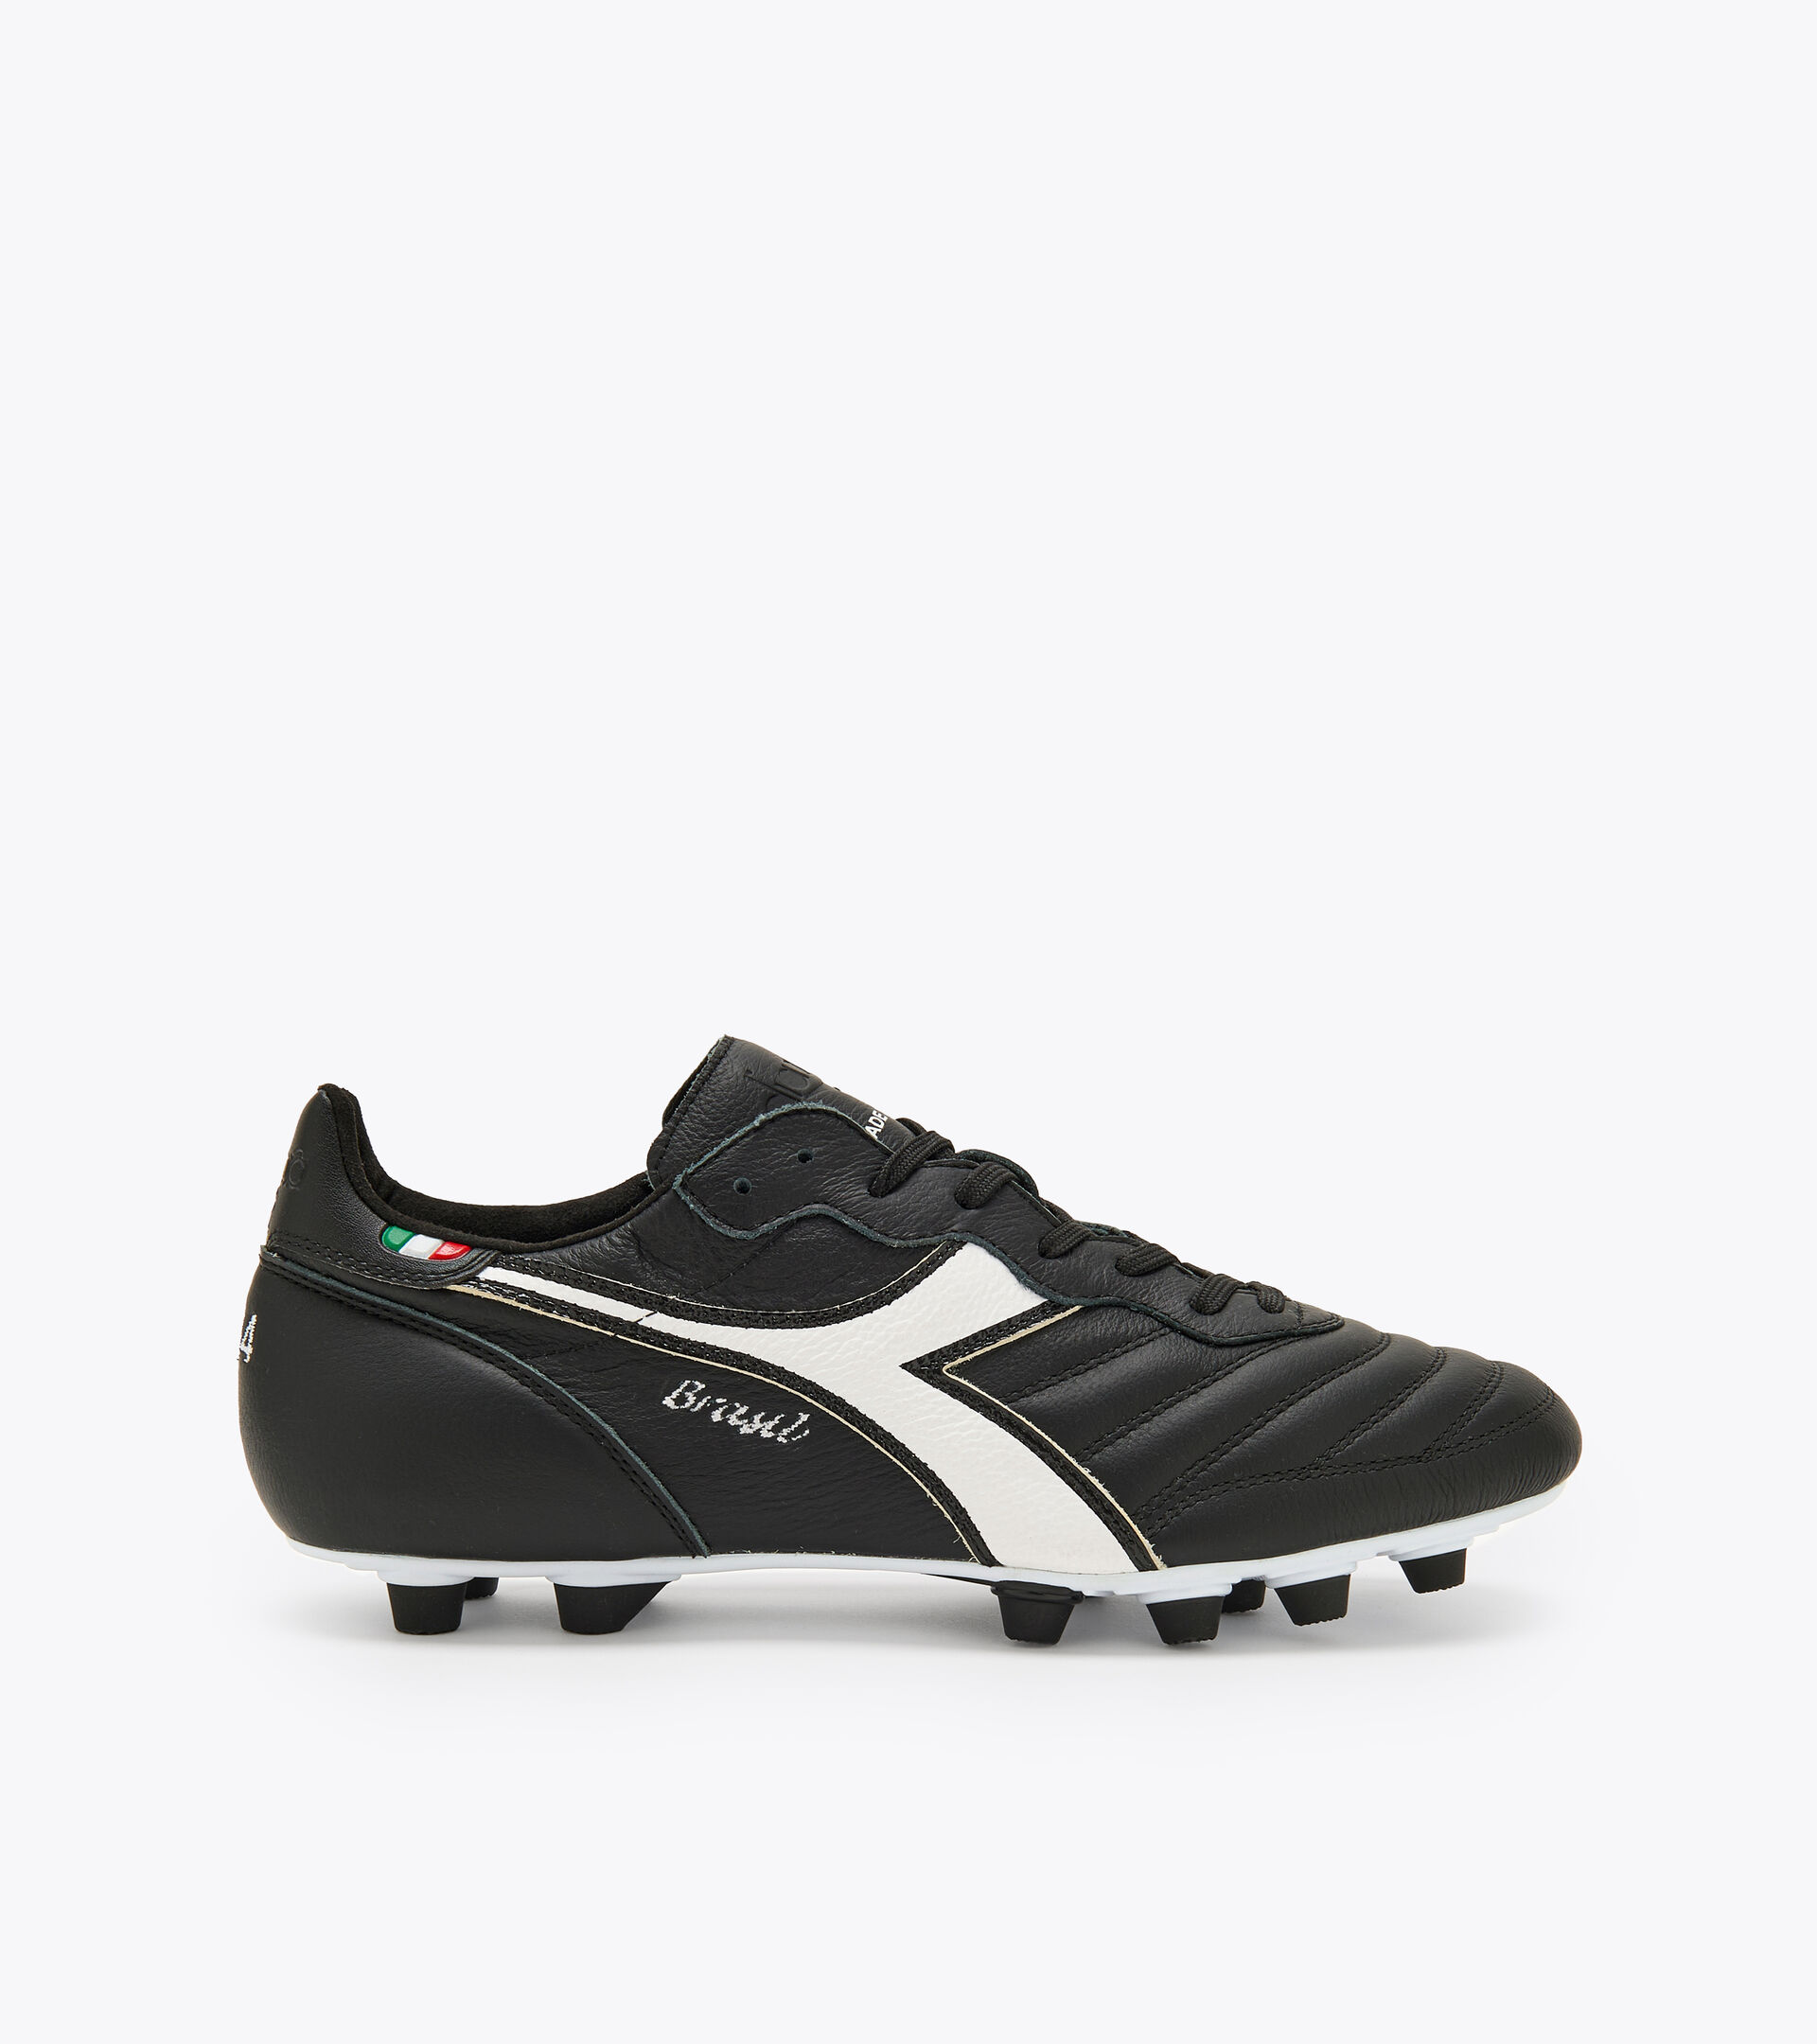 OG LT+ MDPU ground football boots - Made in Italy - Diadora Online Store US